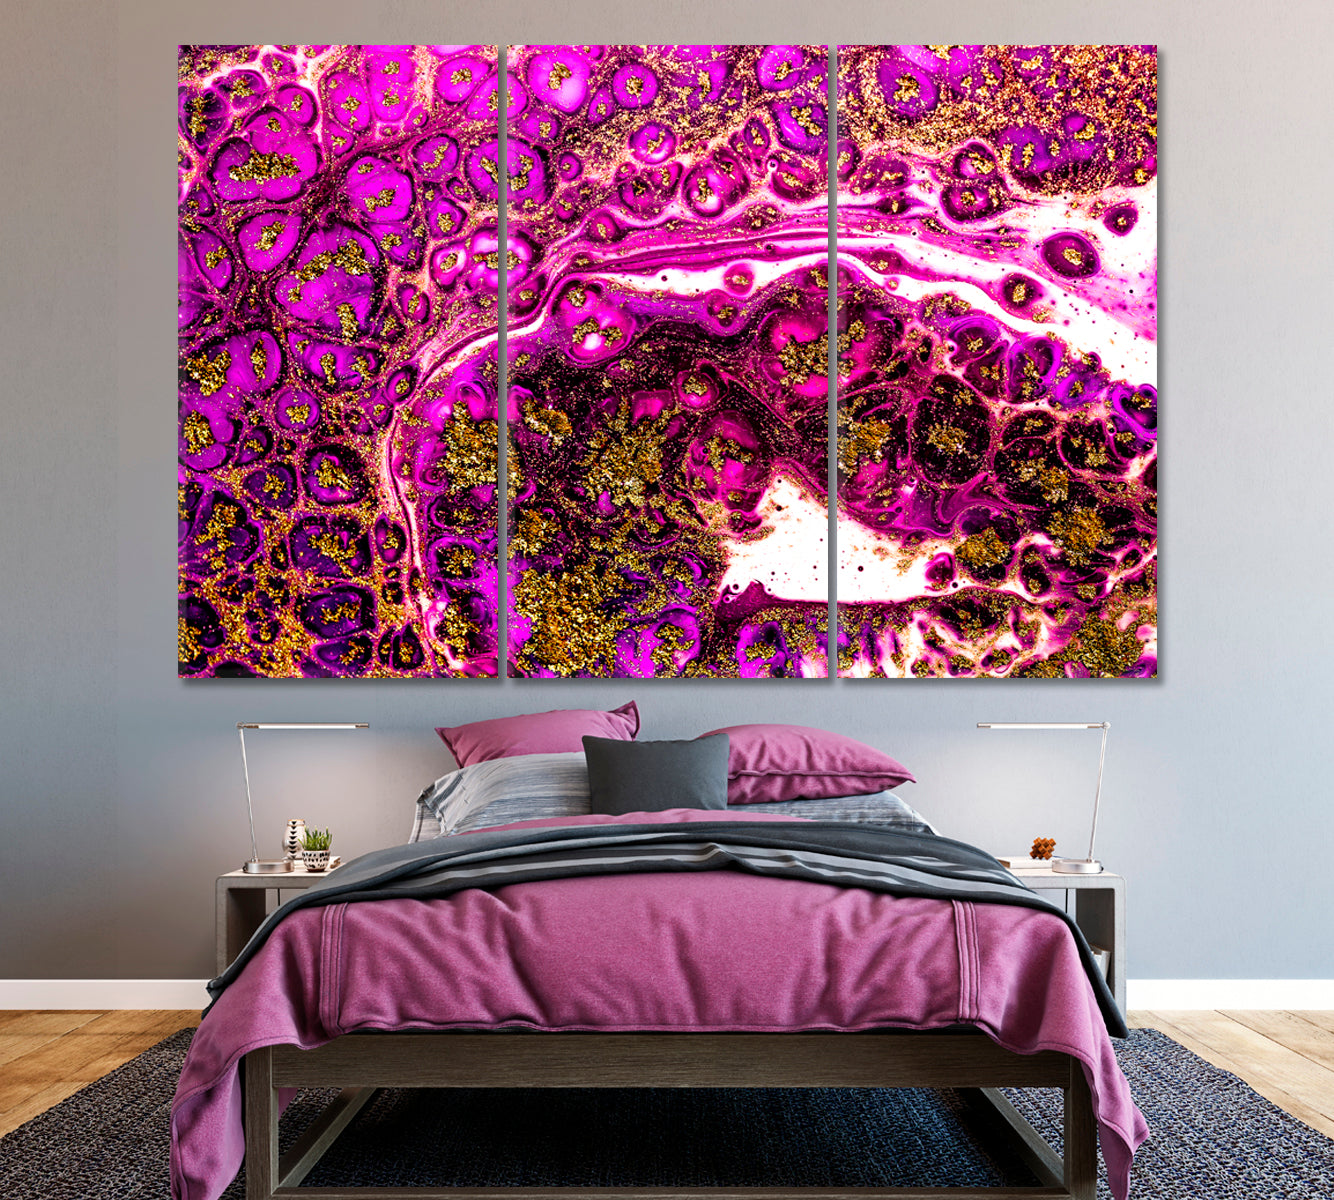 Luxury Fuchsia and Gold Painting Canvas Print ArtLexy 3 Panels 36"x24" inches 